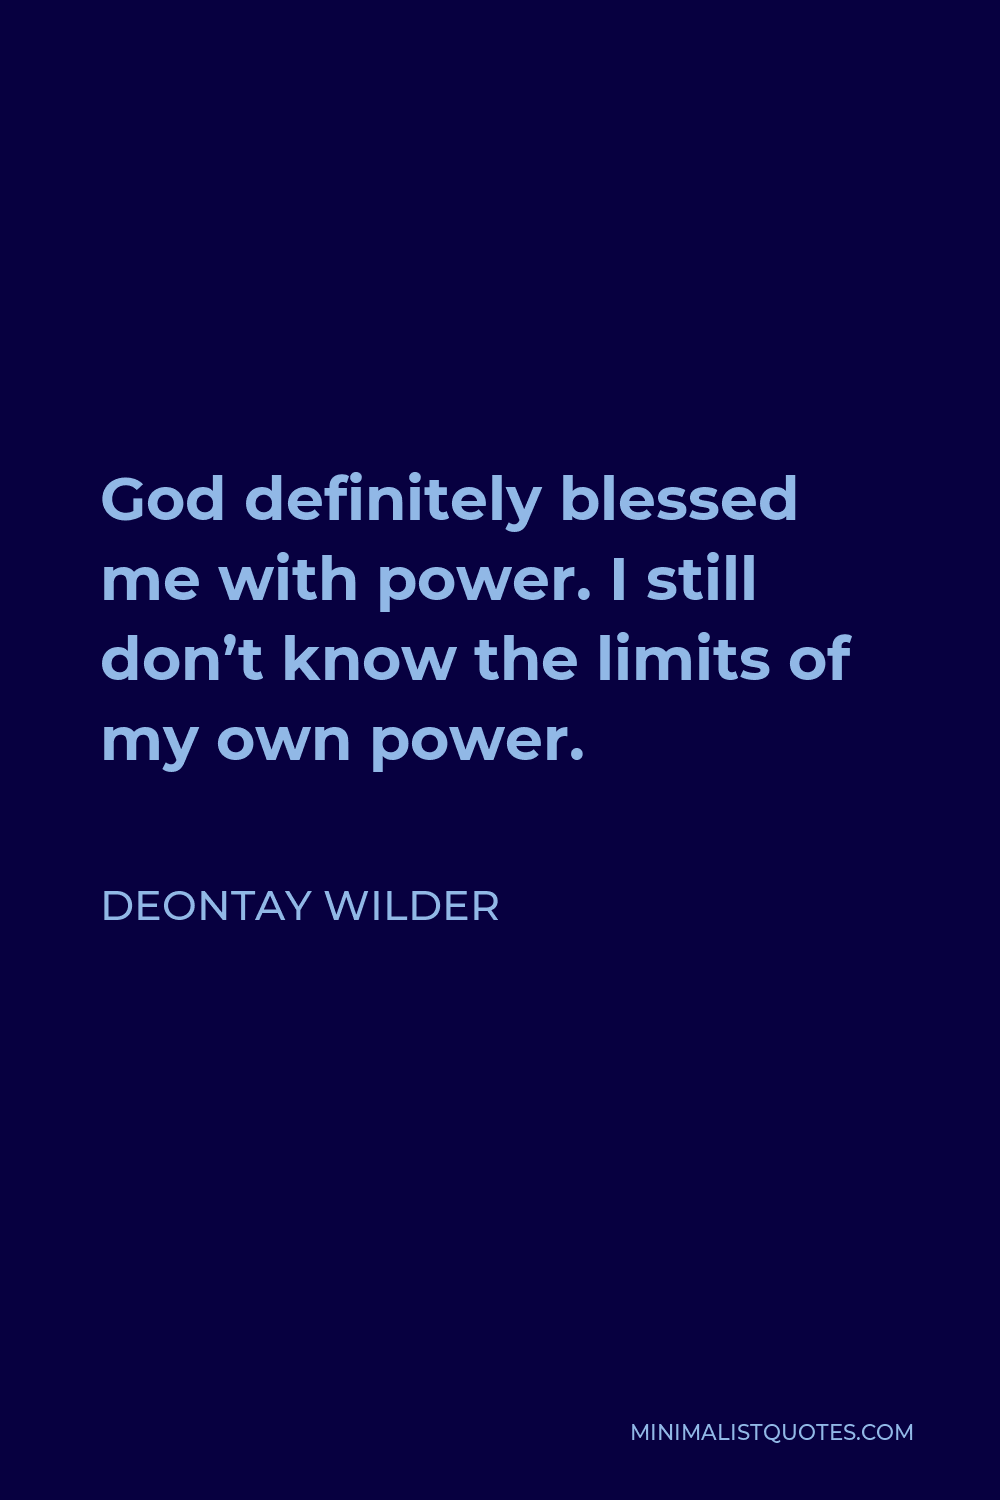 Deontay Wilder Quote - God definitely blessed me with power. I still don’t know the limits of my own power.